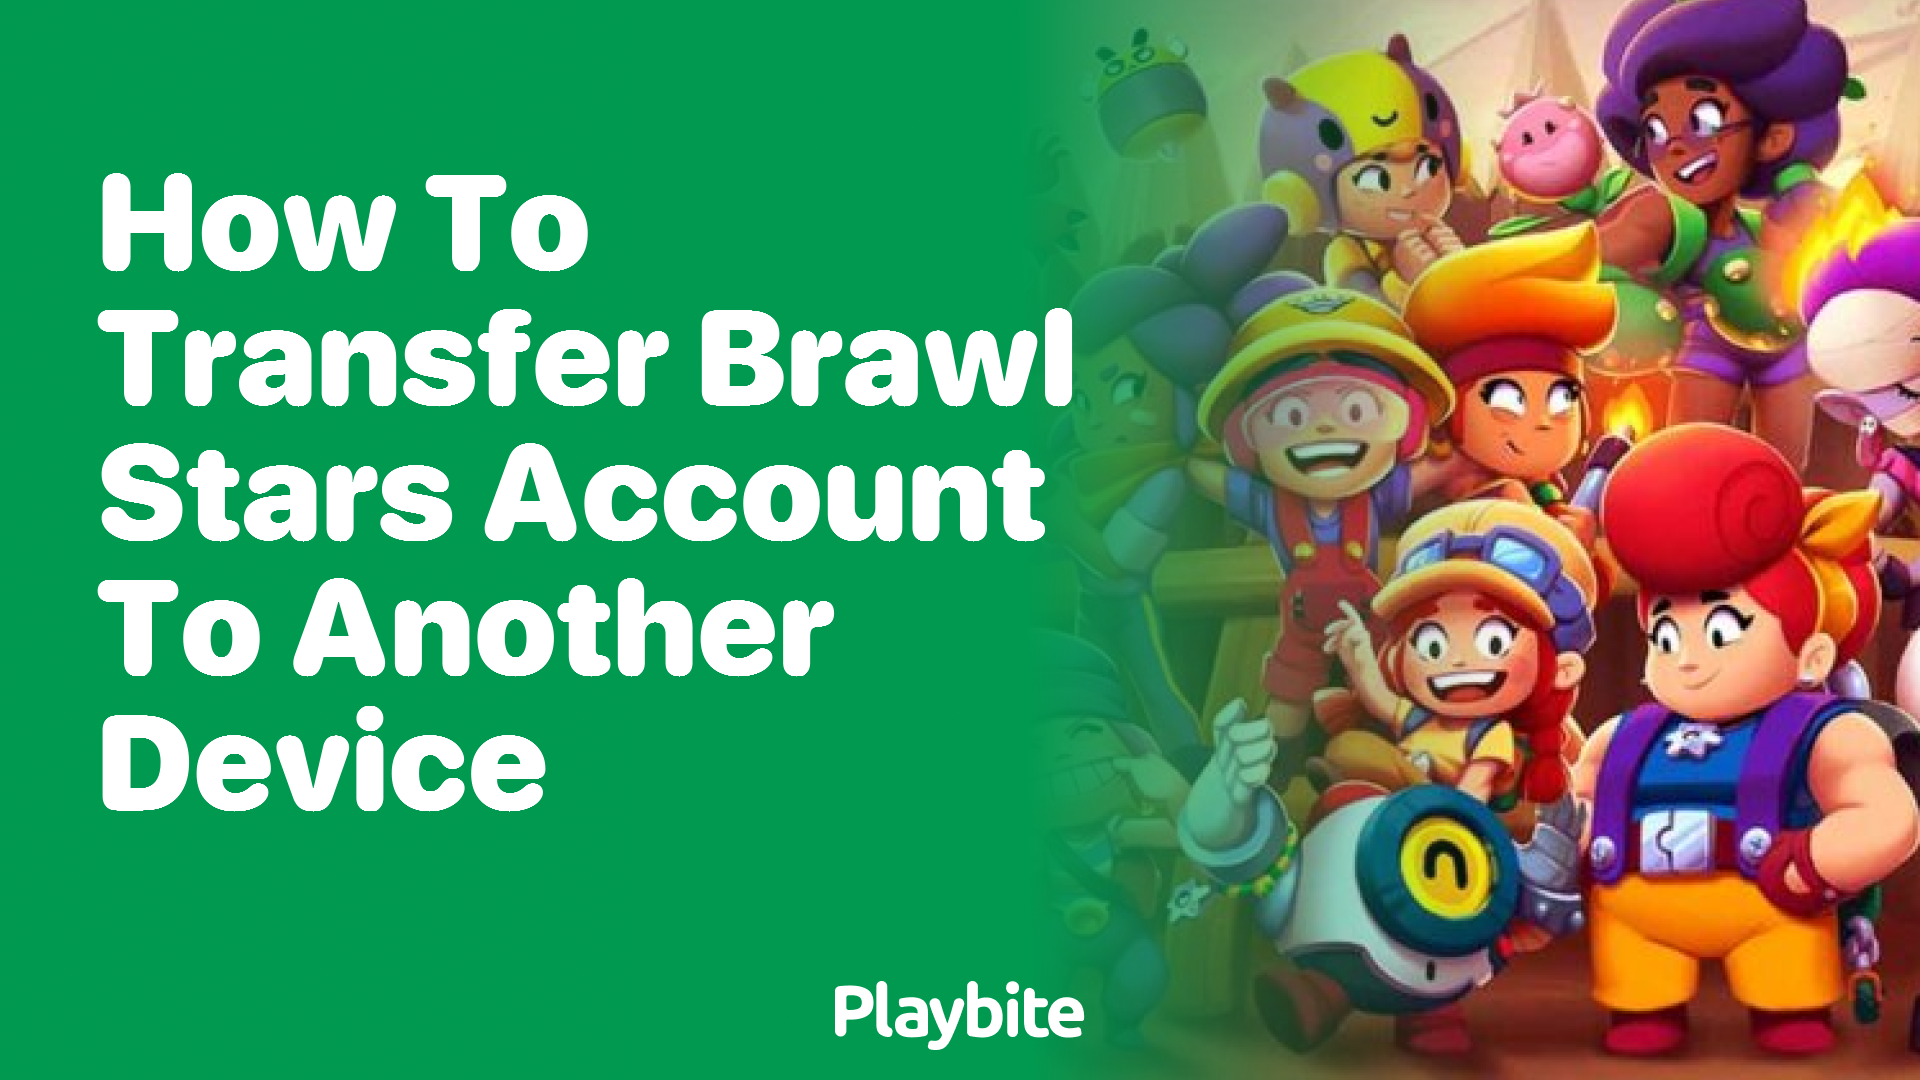 How to Transfer Your Brawl Stars Account to Another Device